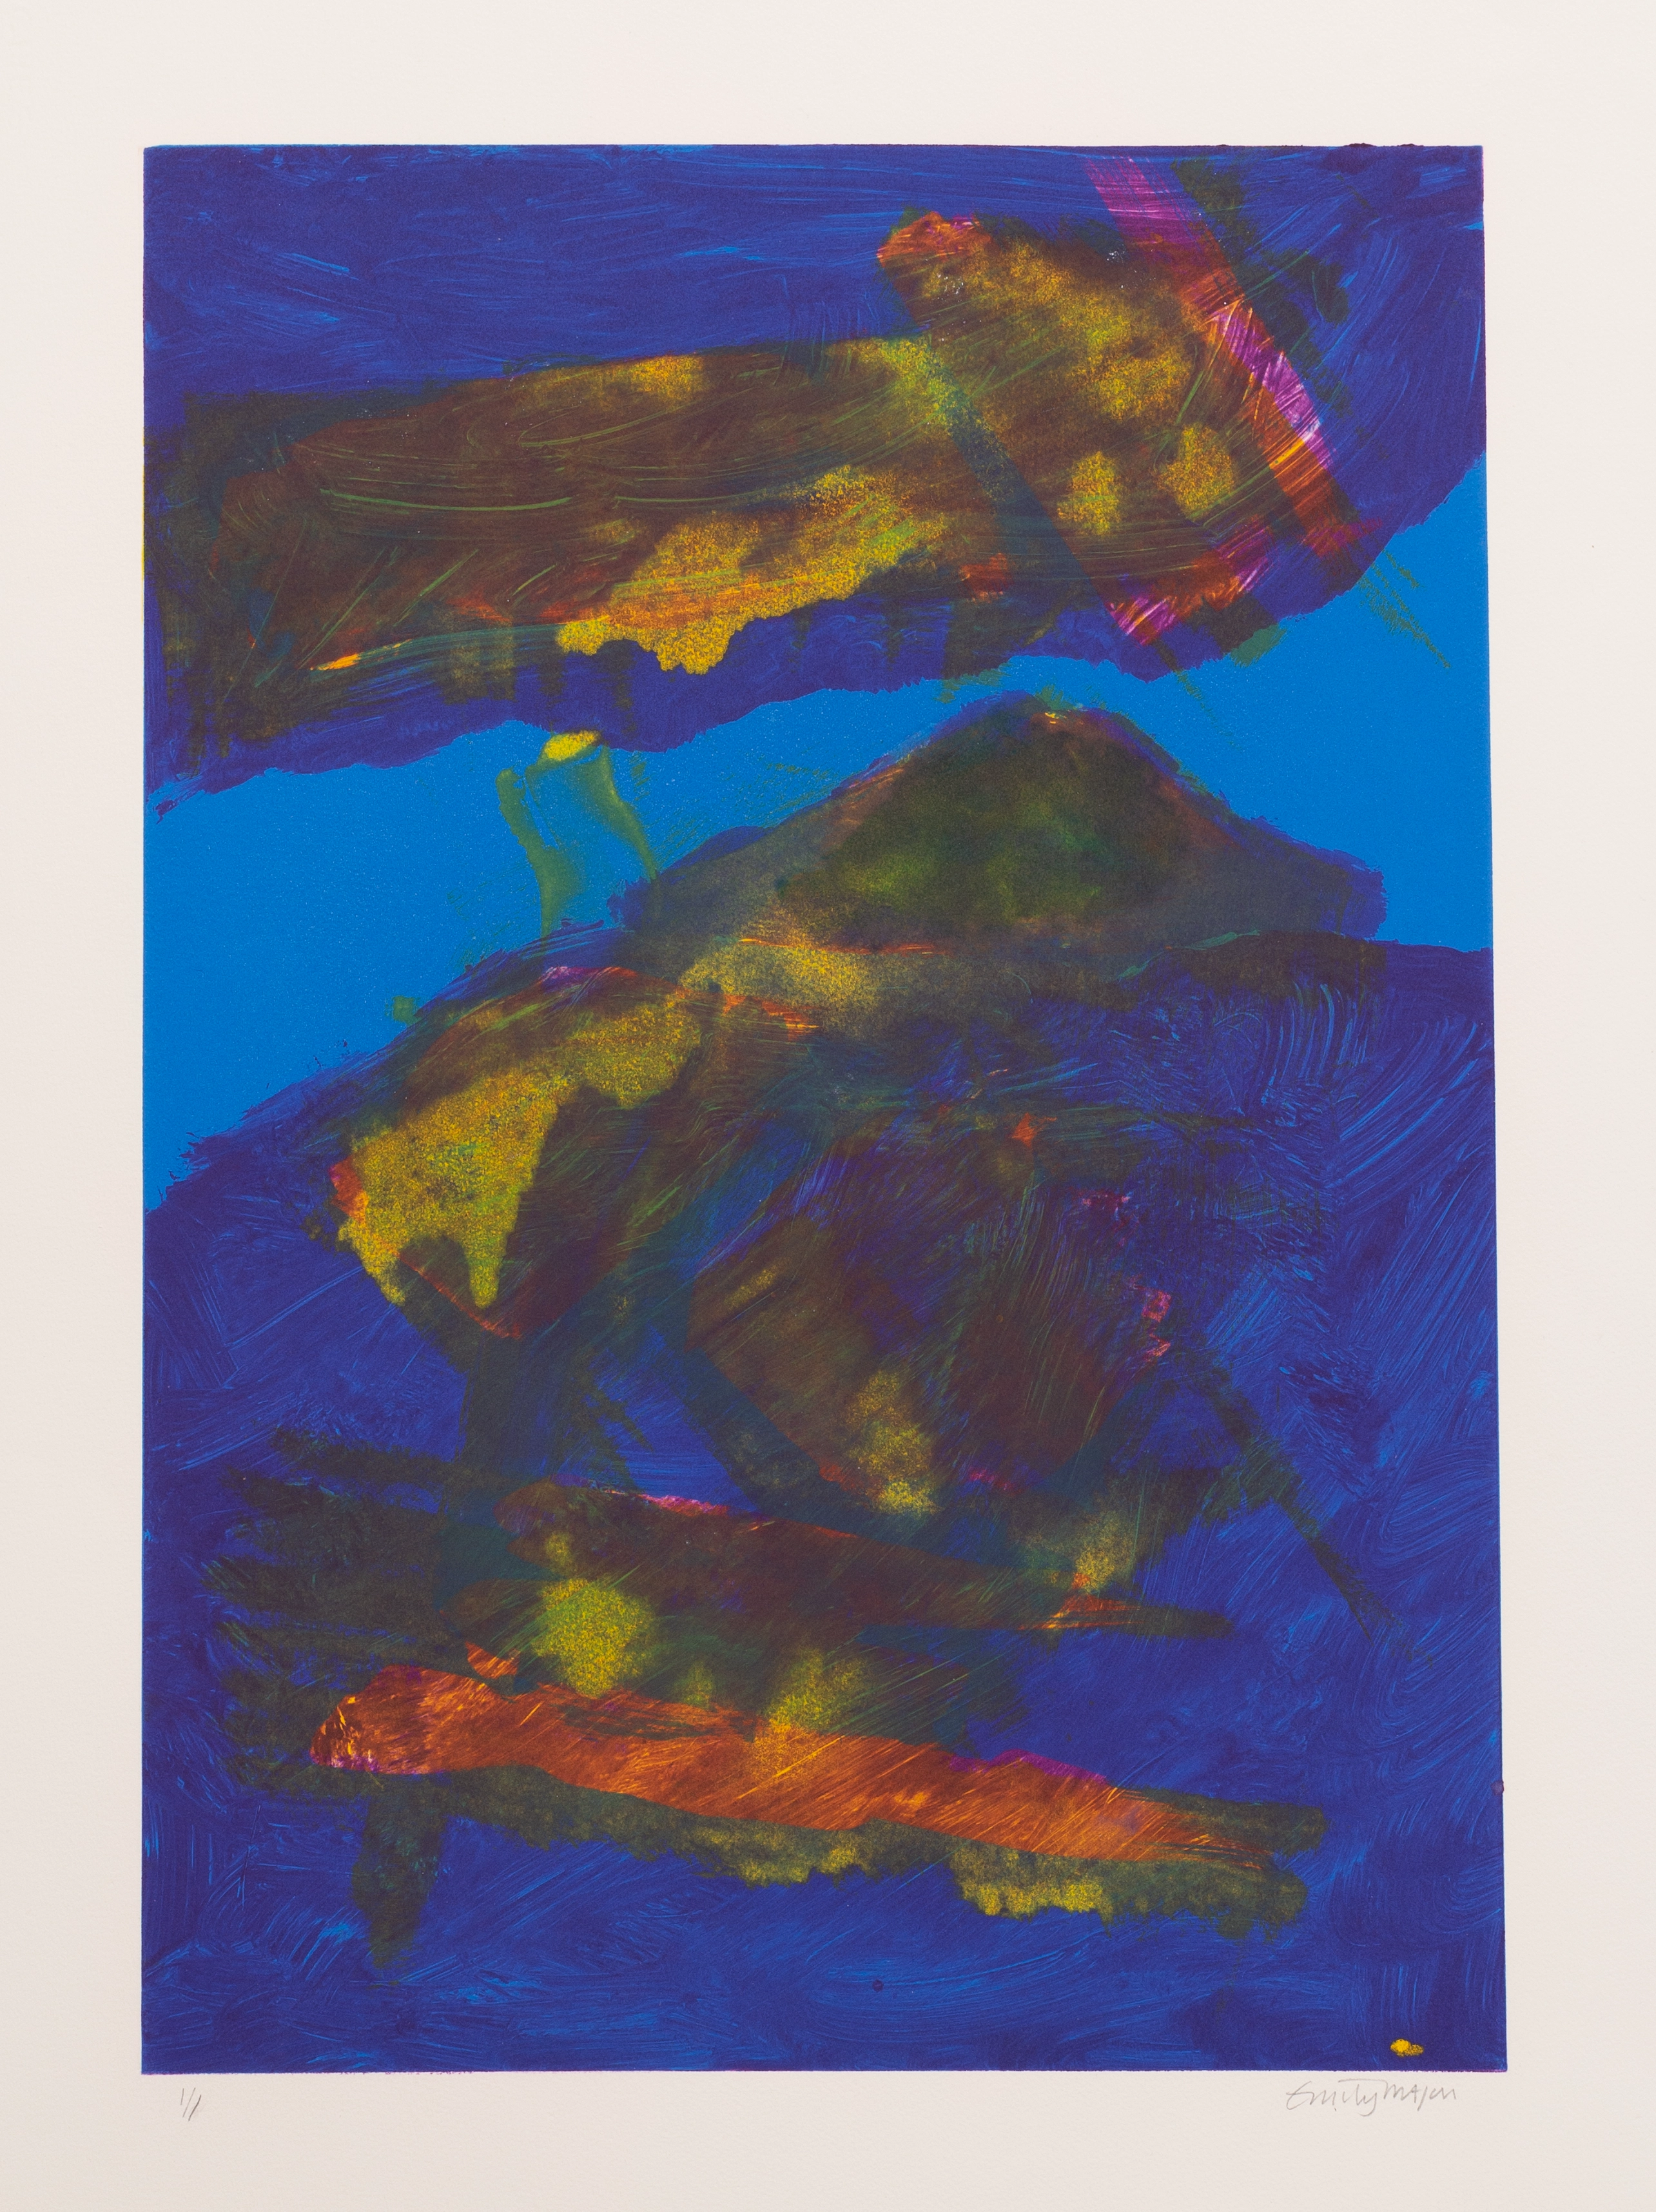 A print with dark blue forms against a light background, with yellow and orange marks layered on top of the dark blue forms.